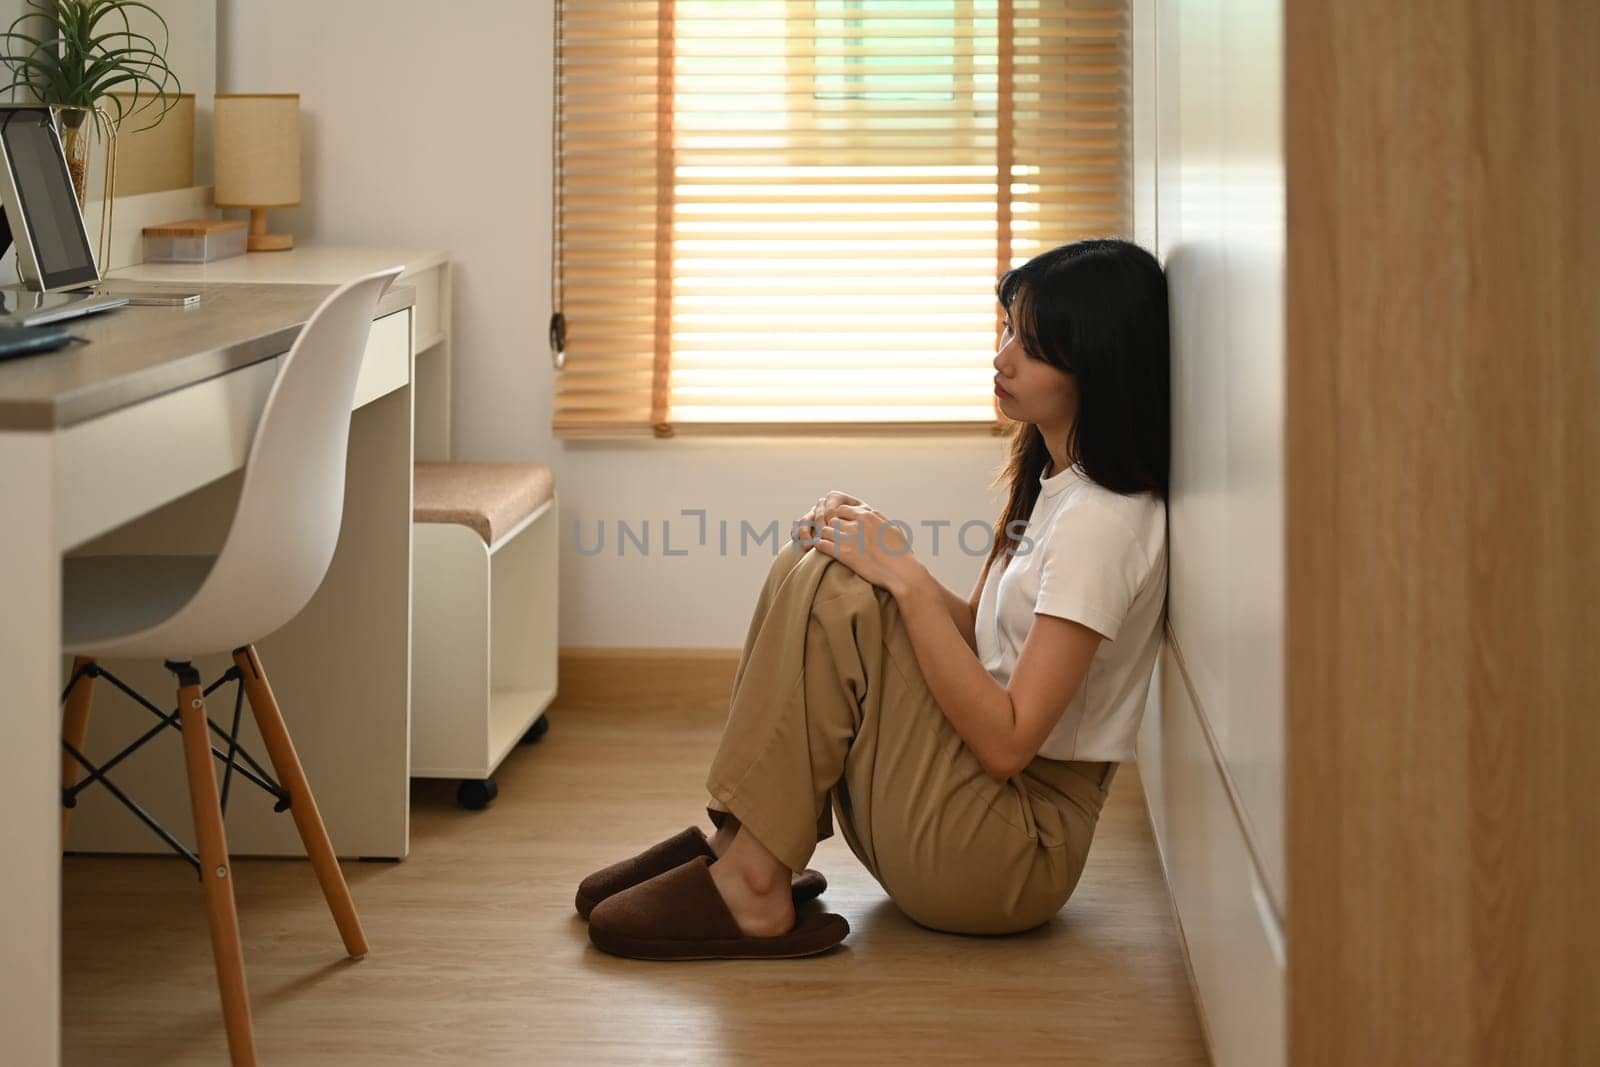 Sad and depressed young woman sitting alone on floor at home. Mental health concept.